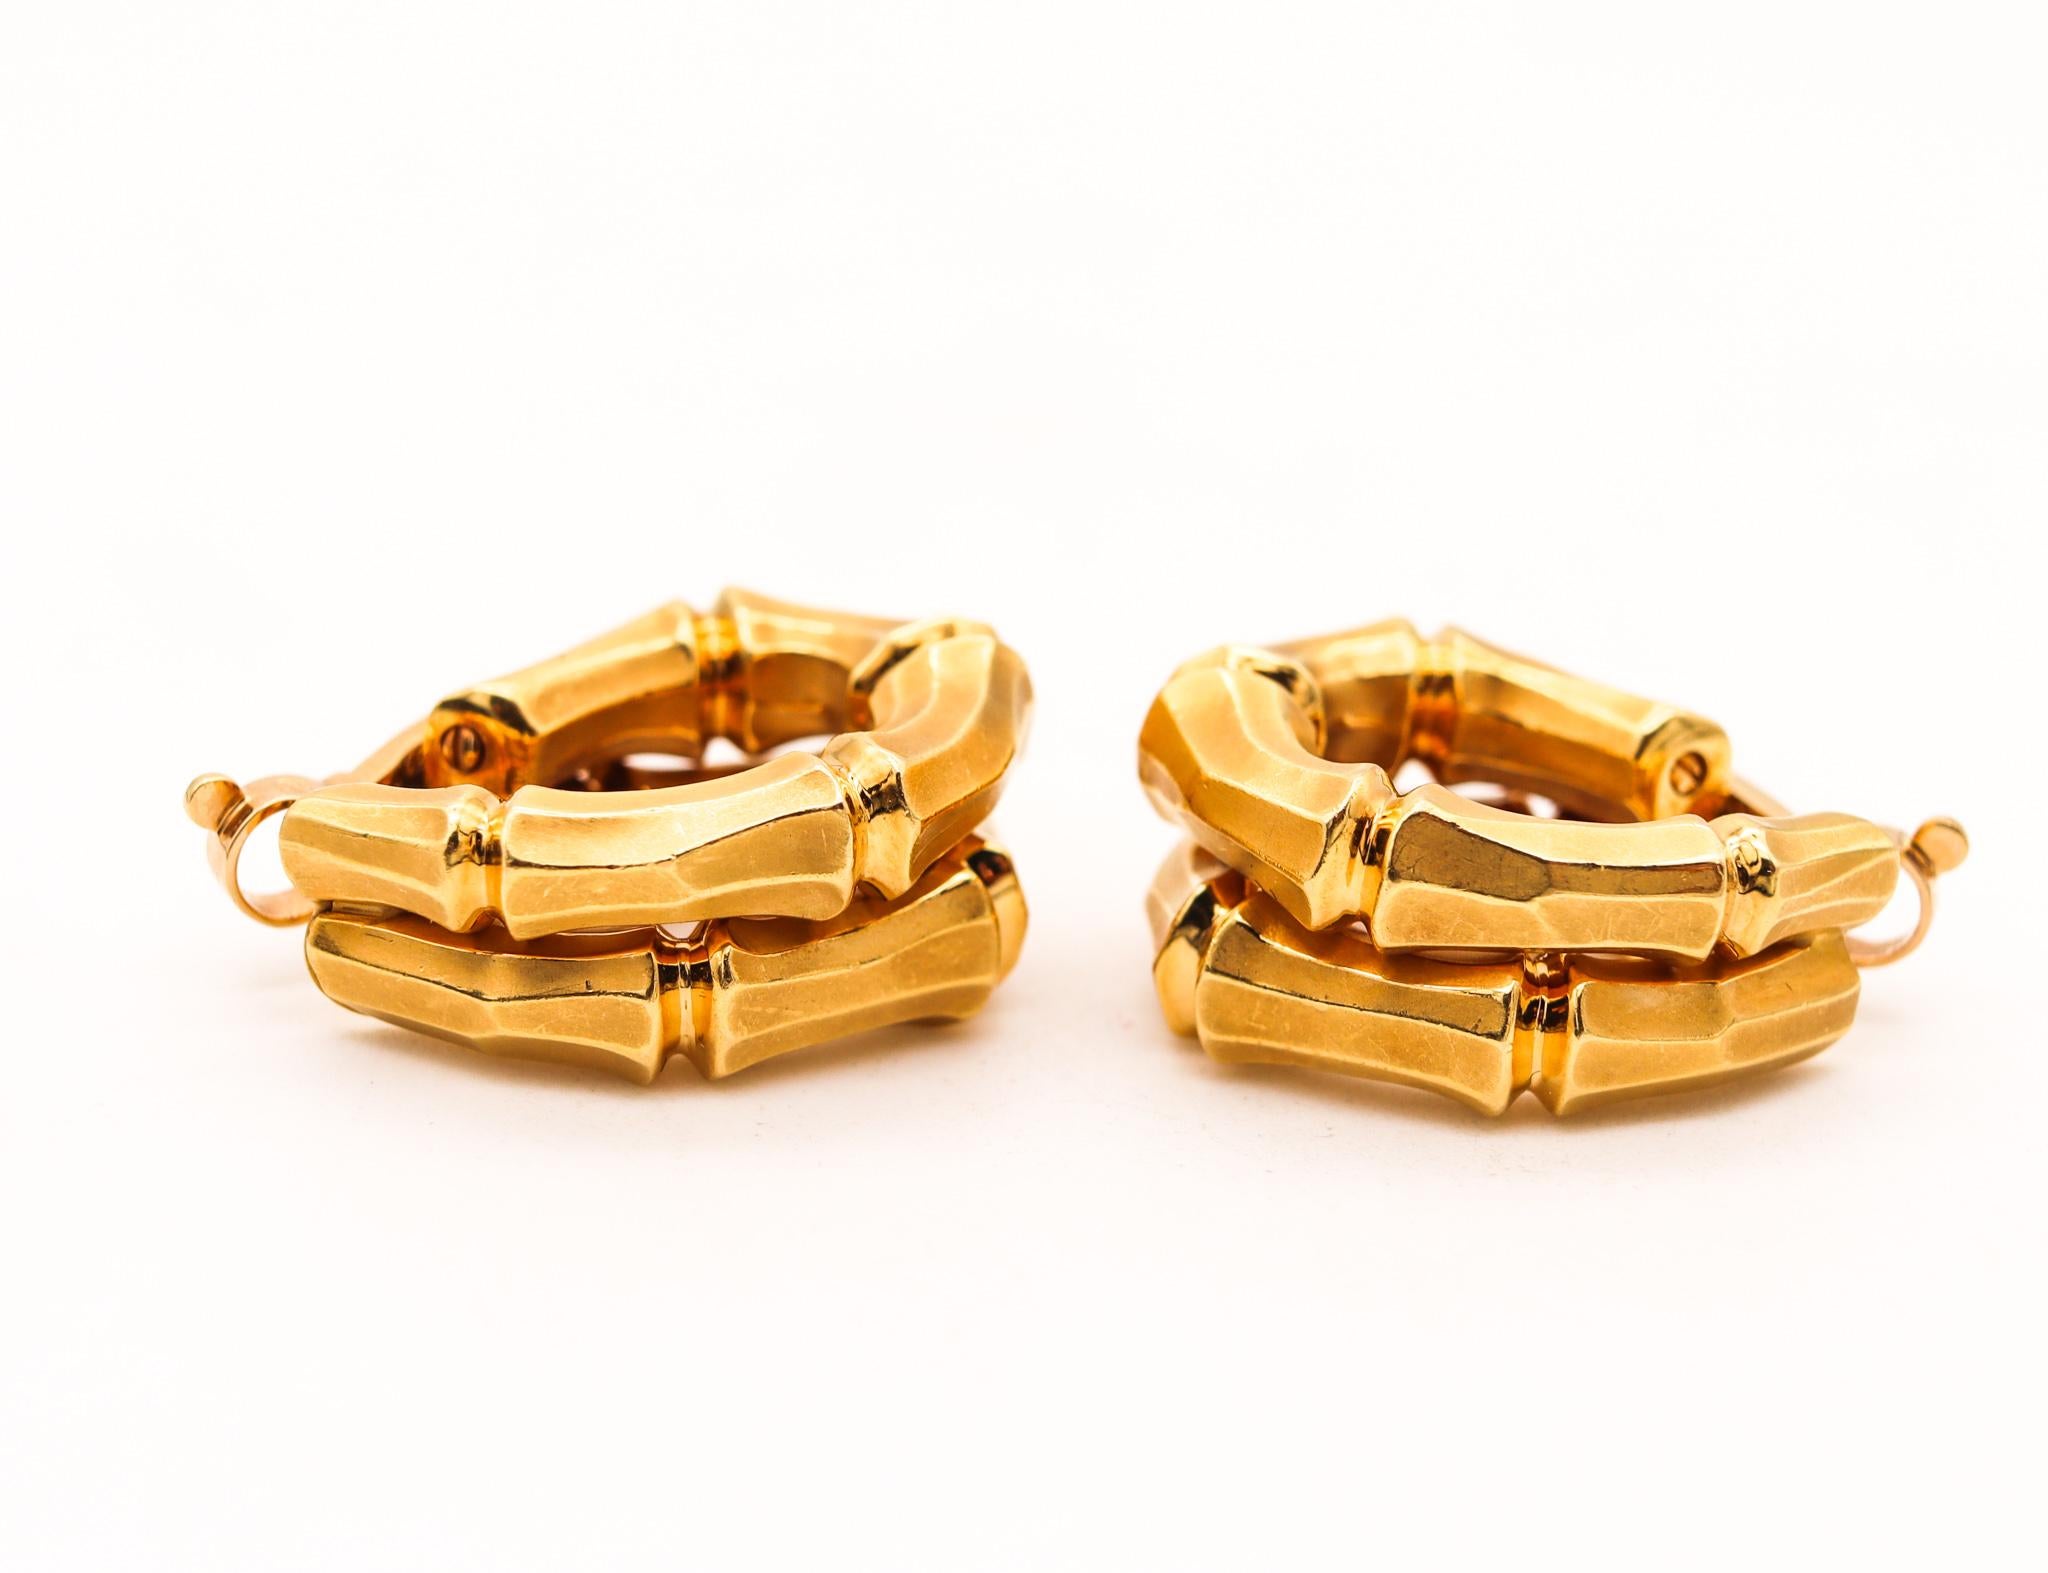 Cartier Paris 1970 Iconic Double Bamboo Hoop Clips Ohrringe In 18Kt Gelbgold im Angebot 1